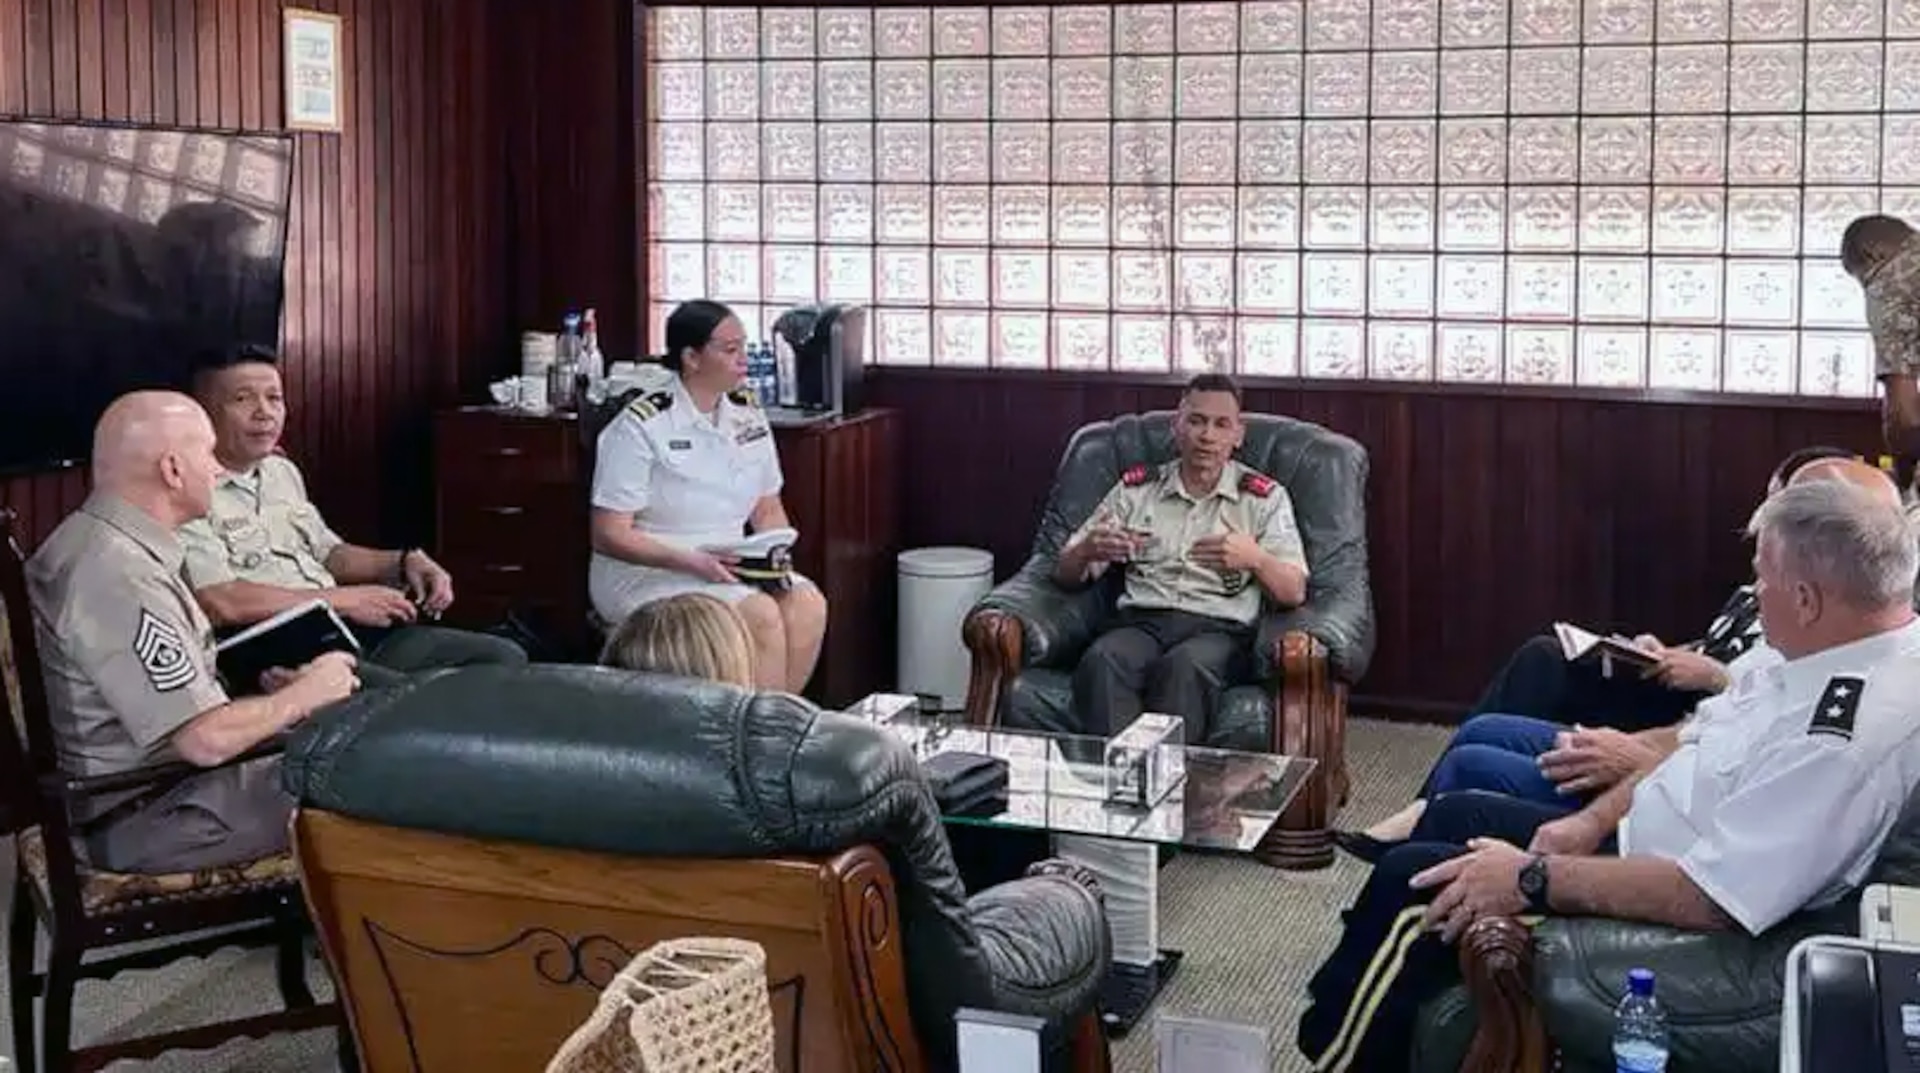 The commander of U.S. Southern Command, Army Gen. Laura Richardson, meets with the Commander of the Suriname Armed Forces, Lt. Col. Werner Kioe A Sen.